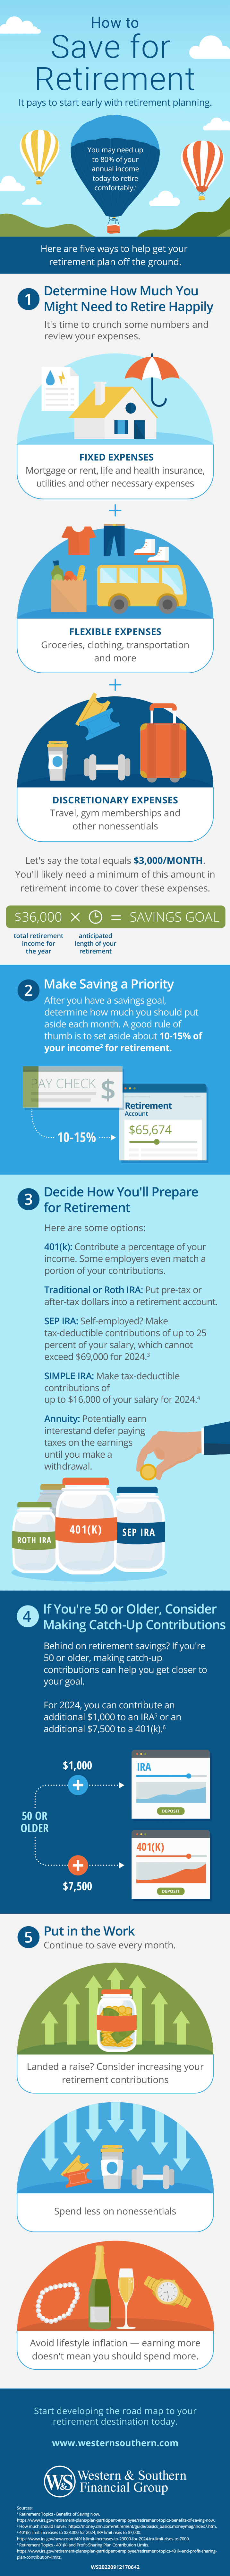 Retirement: Avoid the pitfalls and plan for the possibilities